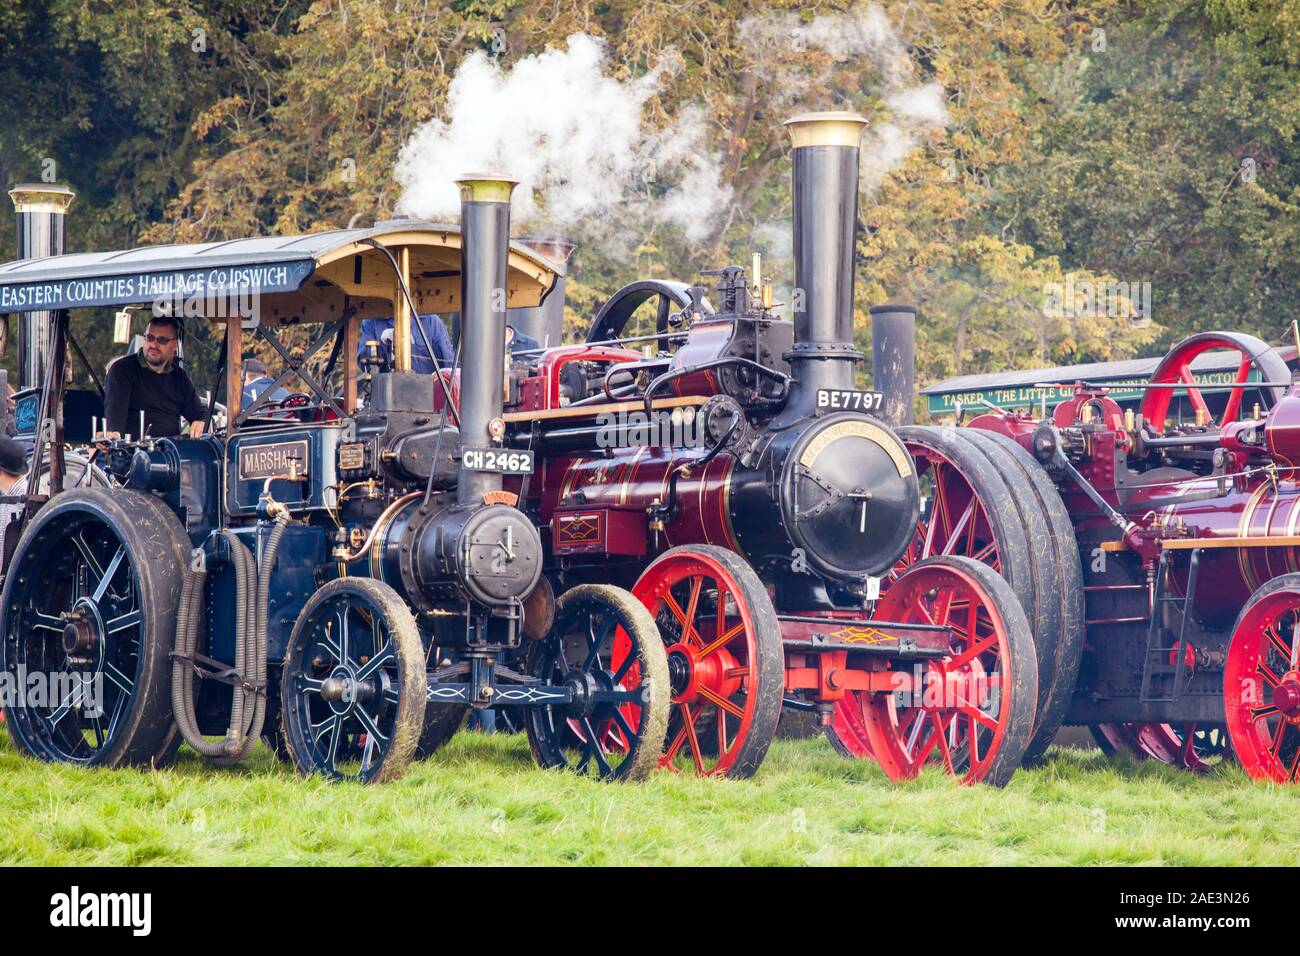 Vintage Steam and traction  engines on display at the Malpas yesteryear steam rally Cheshire England Stock Photo